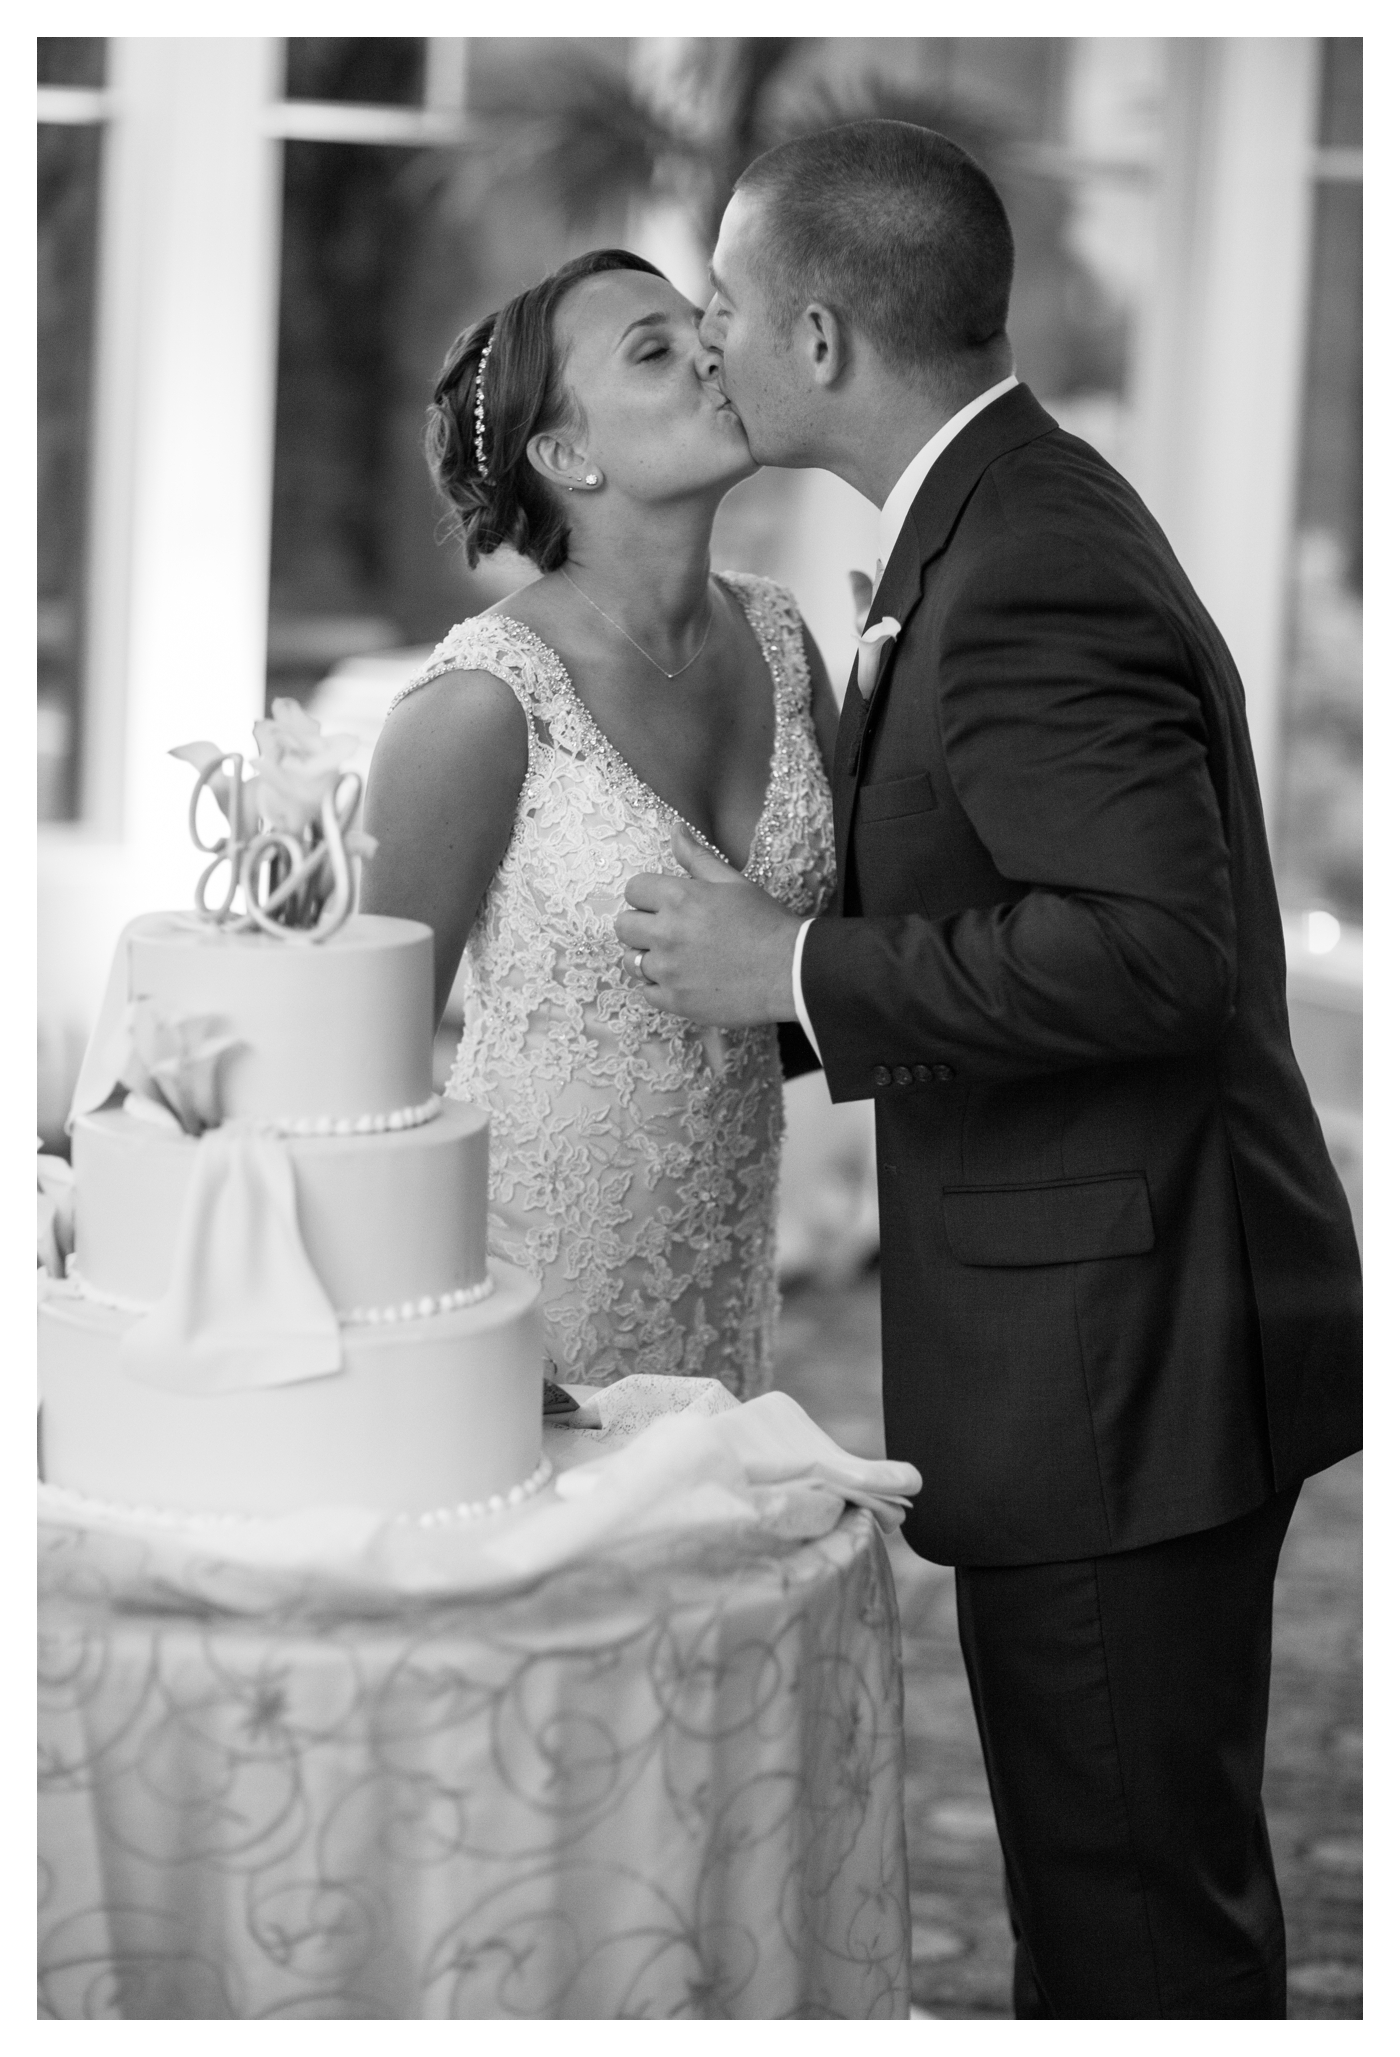 The Haven Country Club Wedding - Jaclyn + James - Michele Ashley Photography